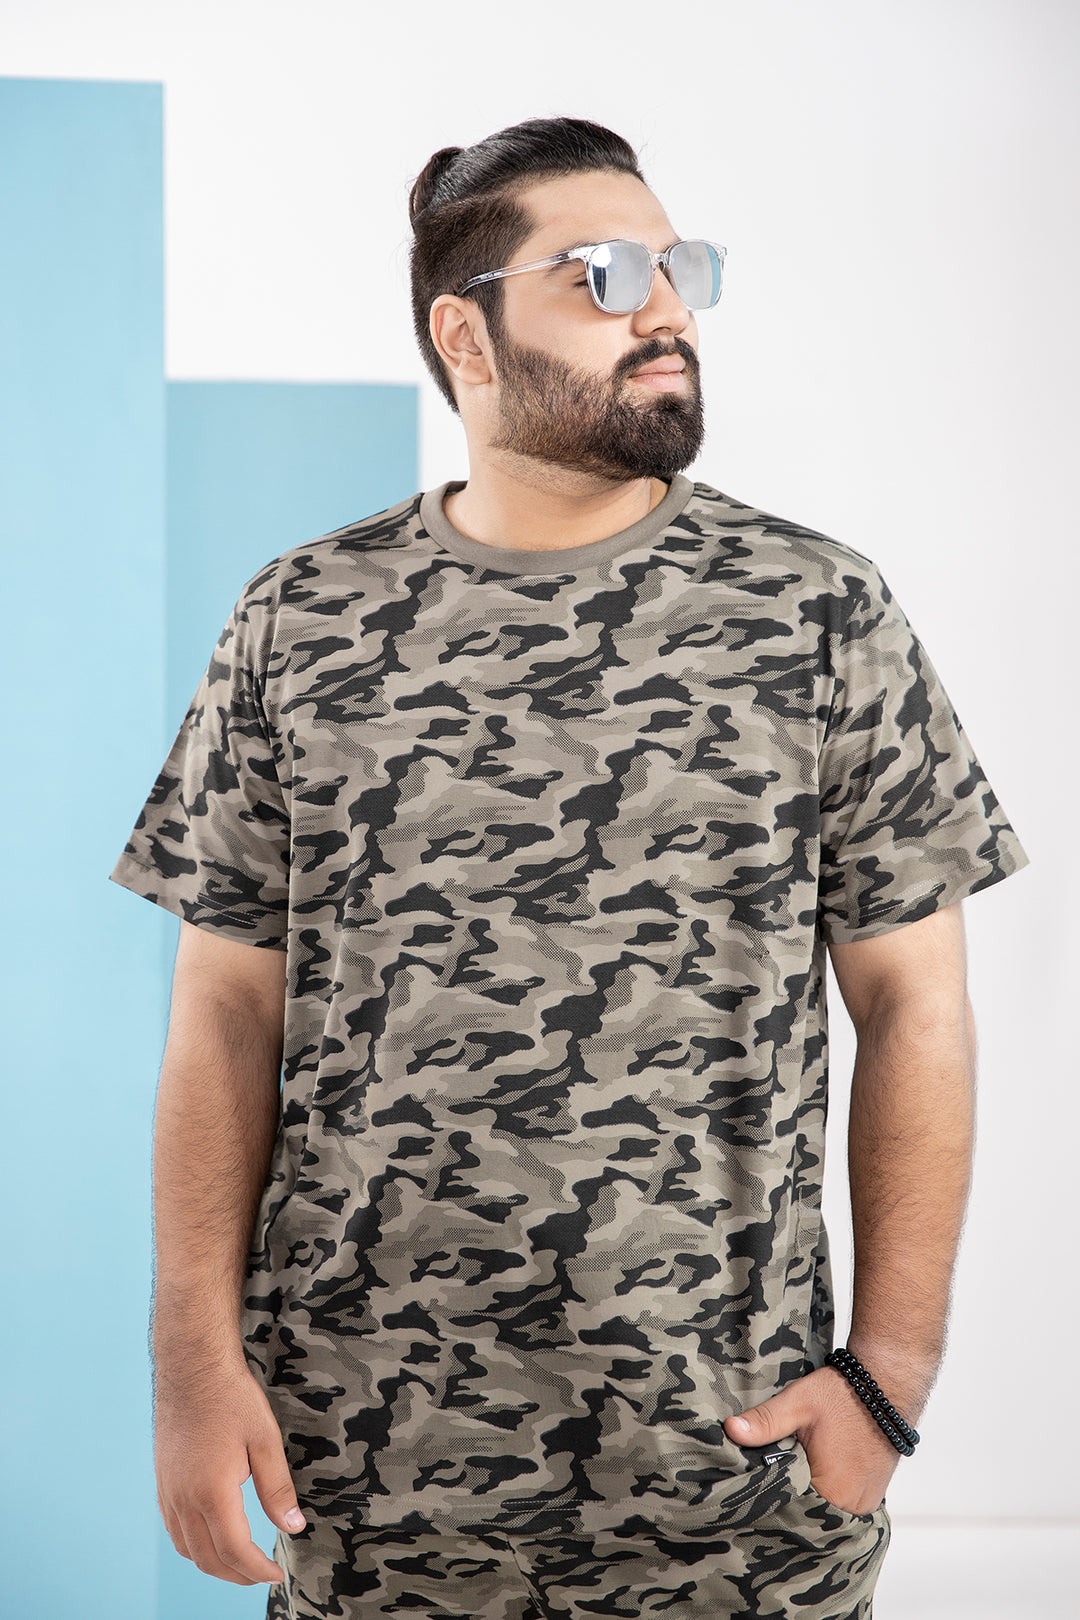 Green Camouflage T-Shirt (Plus Size) - S21 - MT0093P